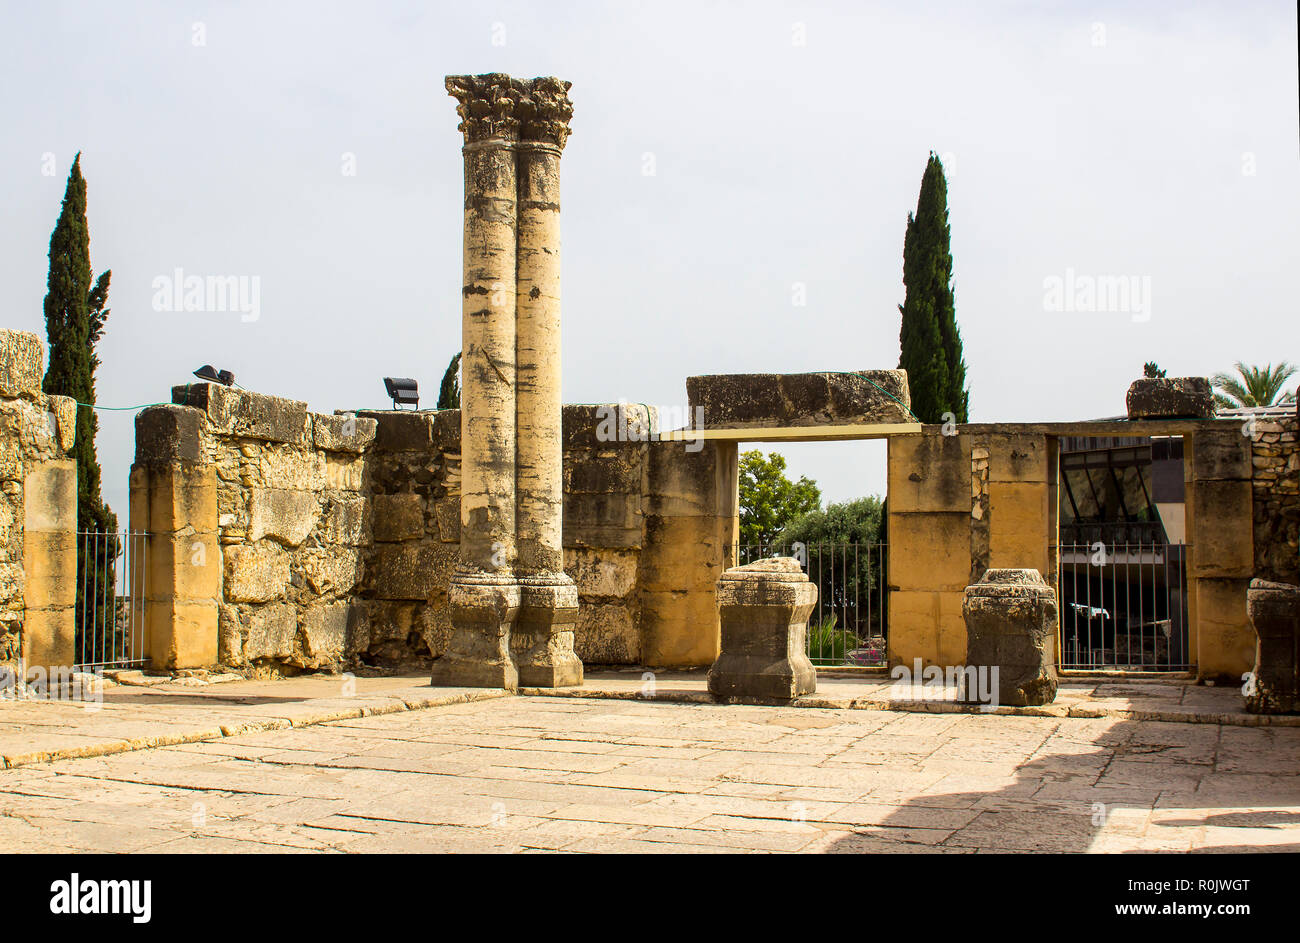 3 May 2018 The excavated ruins of a first century Jewish Synagogue in the ancient town of Capernaum in Israel where Jesus lived for some time. Stock Photo